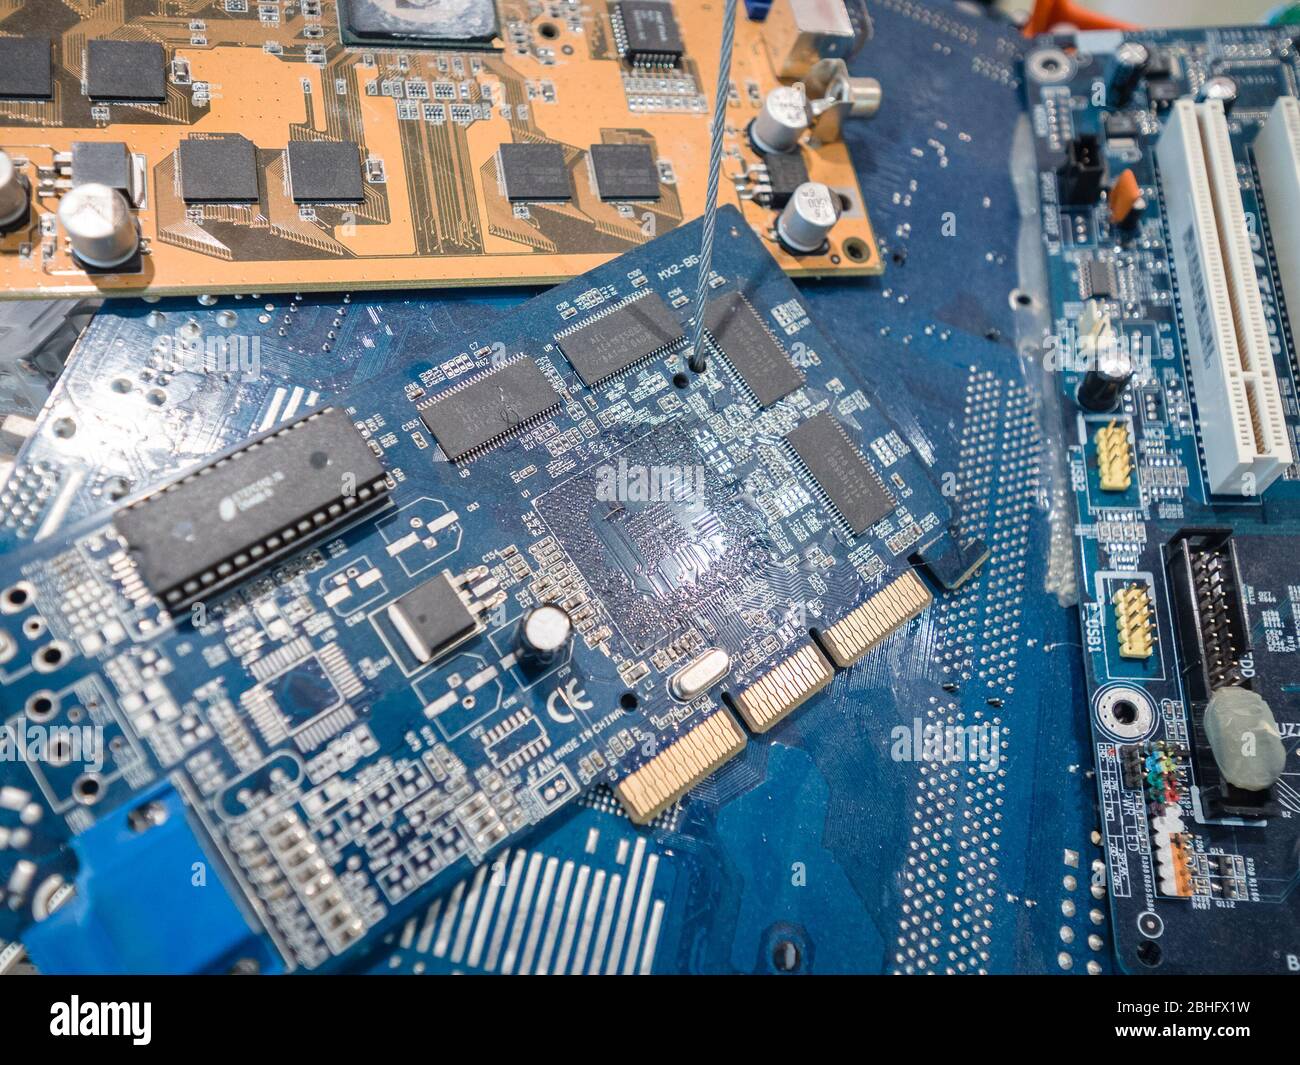 Trento, Italy - November 19, 2017: Detail of electronic boards representing the concept of technological evolution. Stock Photo